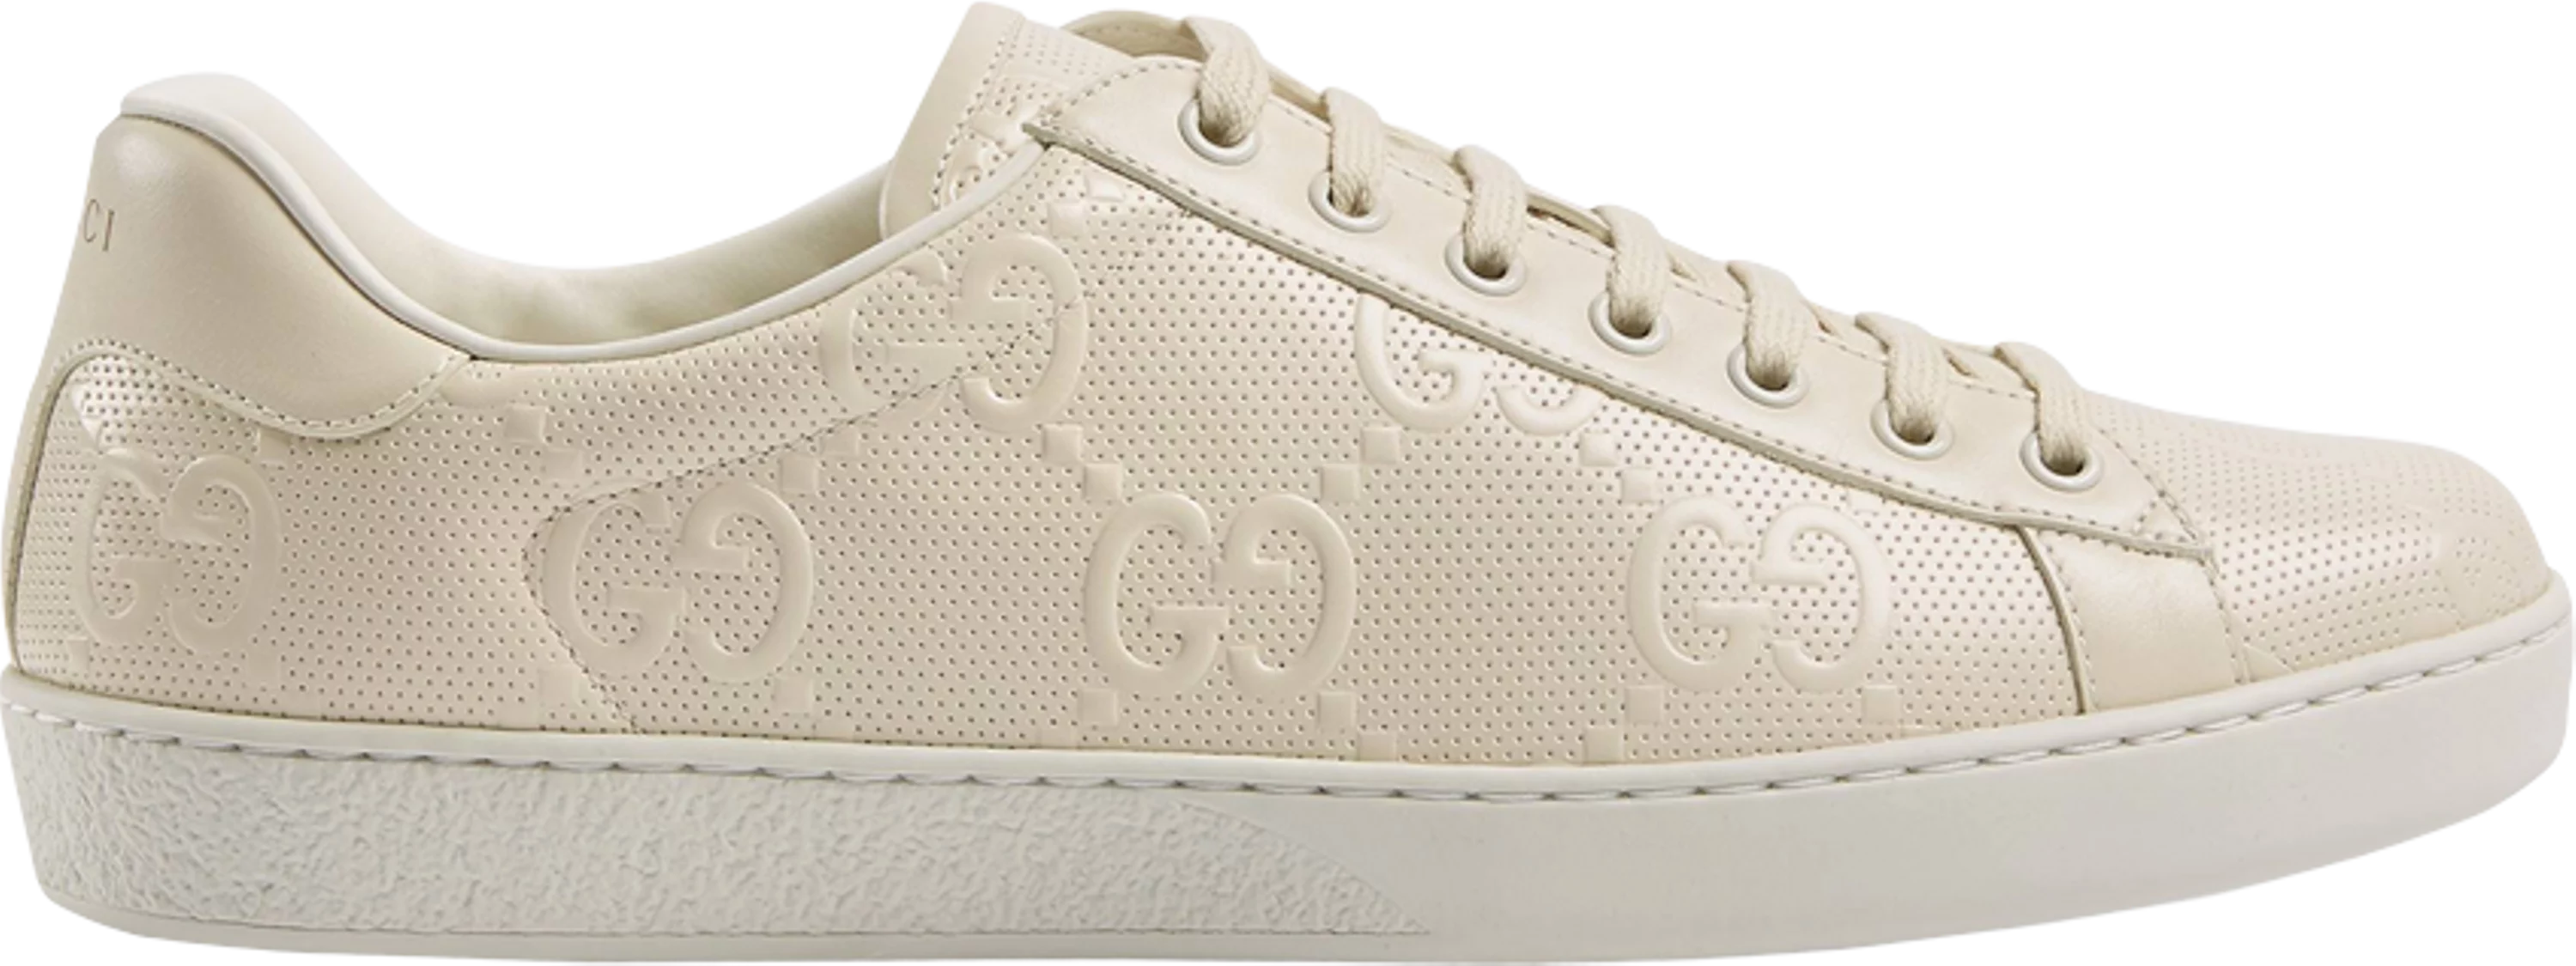 Gucci Ace GG Embossed "White" (PreOwned)